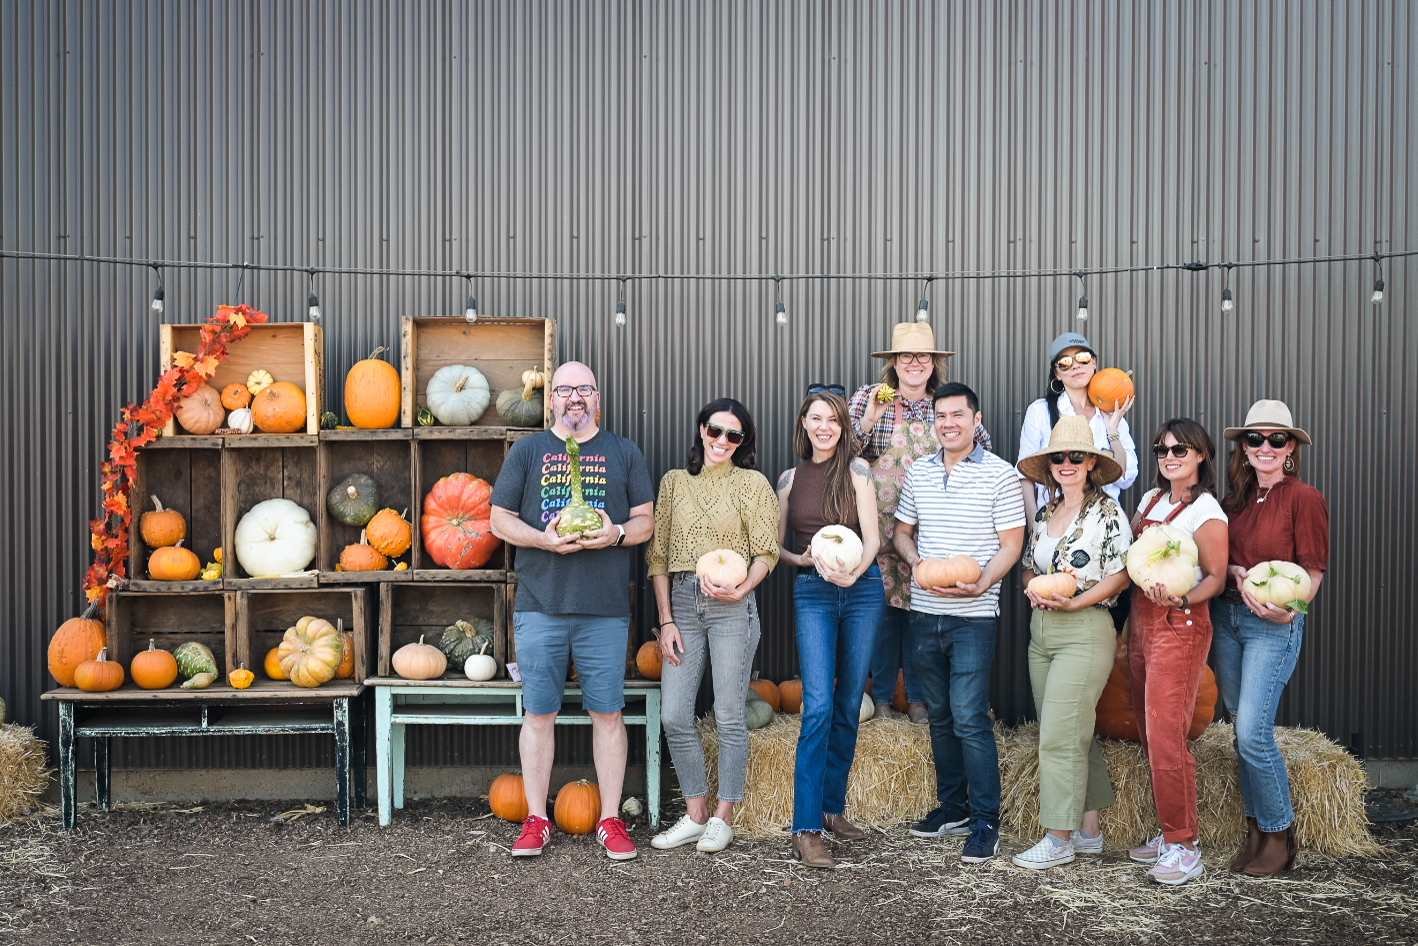 An agritourism group from California Grown at Sweet Thistle Farms in Clovis